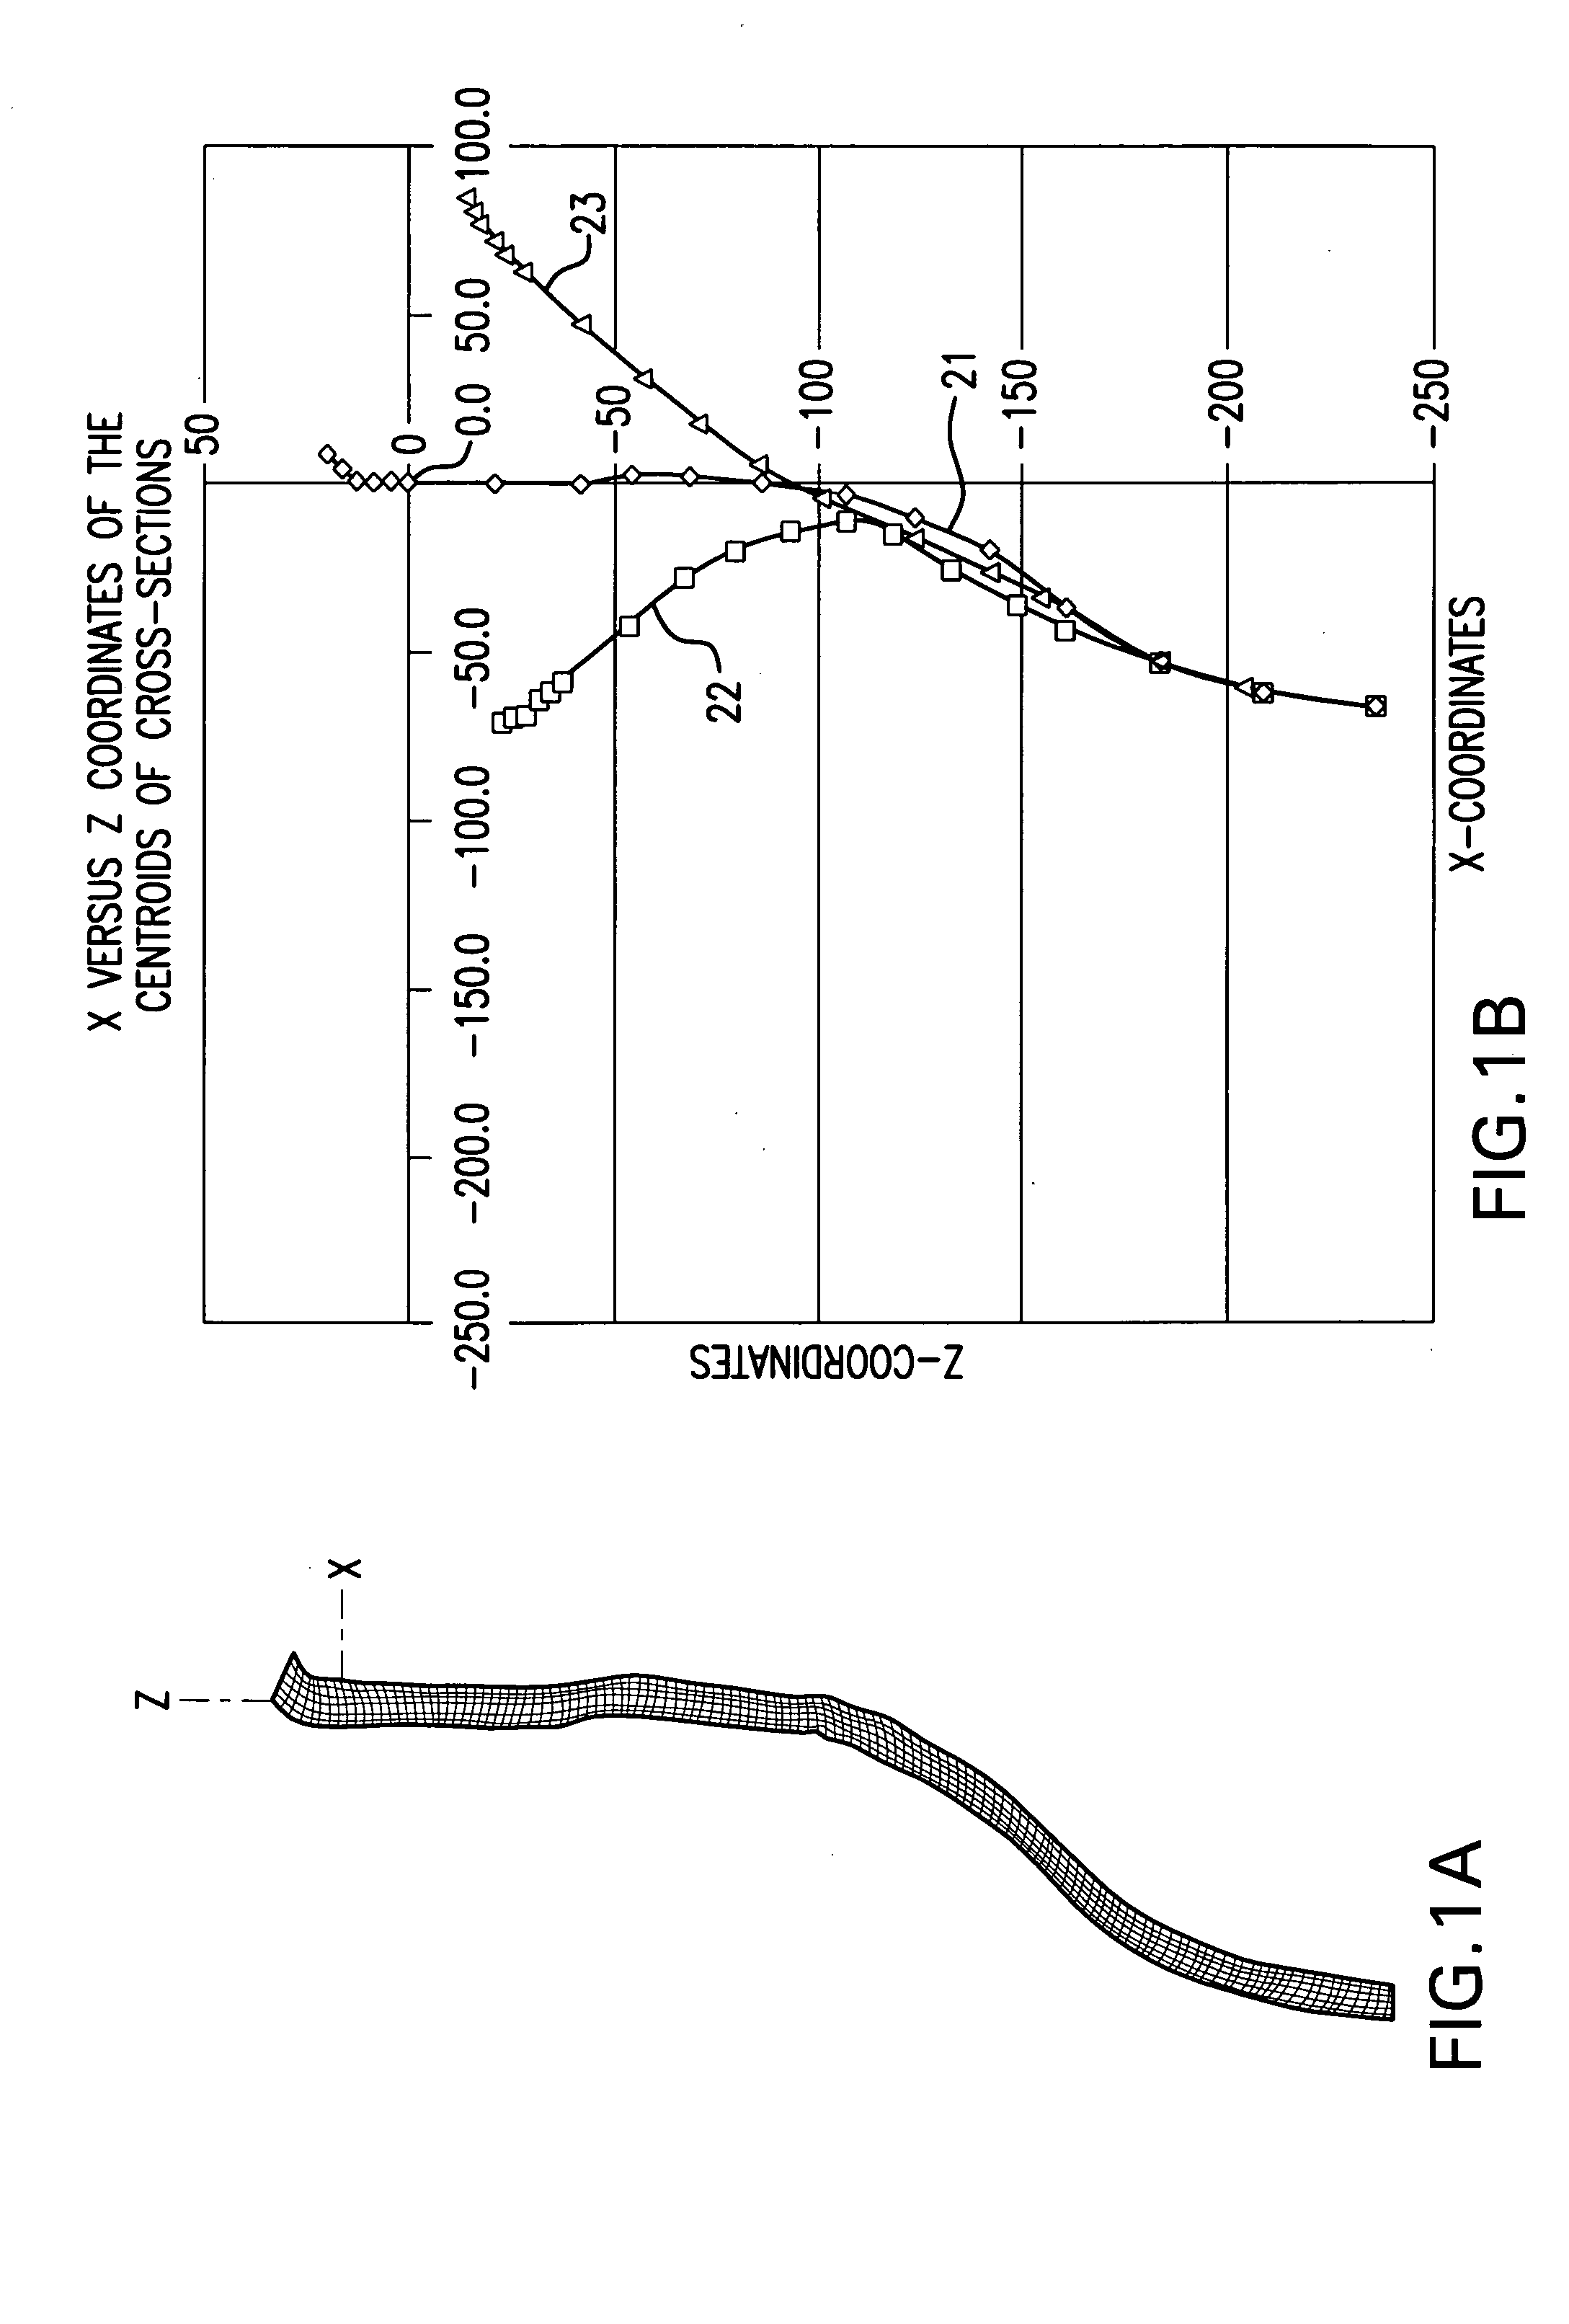 Computer simulation model for determining damage to the human central nervous system